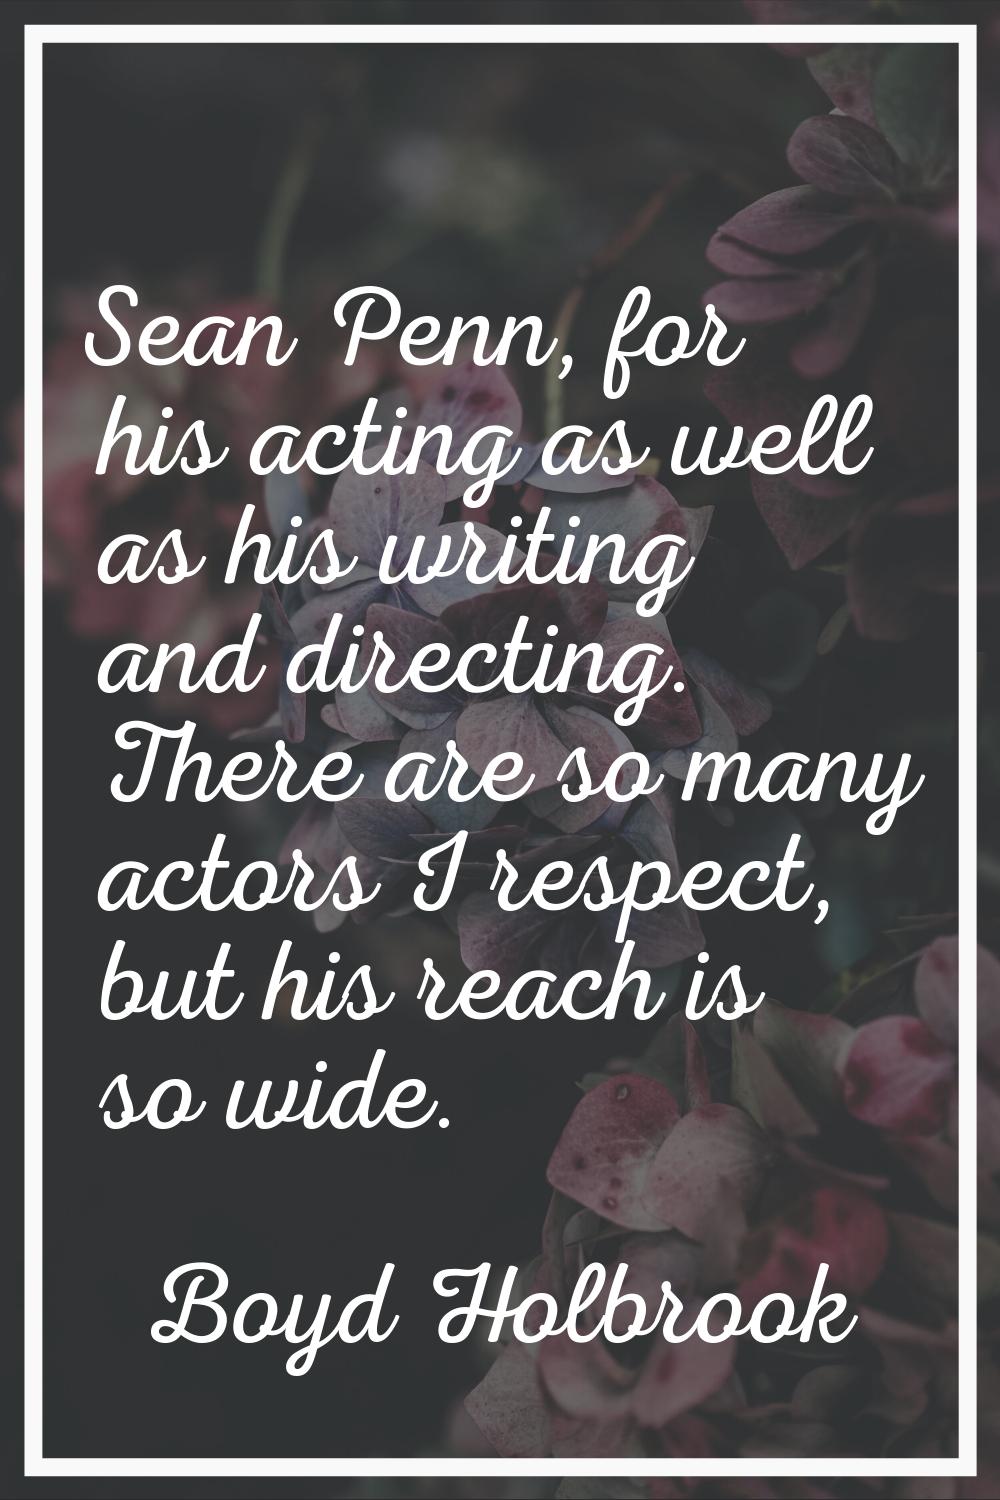 Sean Penn, for his acting as well as his writing and directing. There are so many actors I respect,